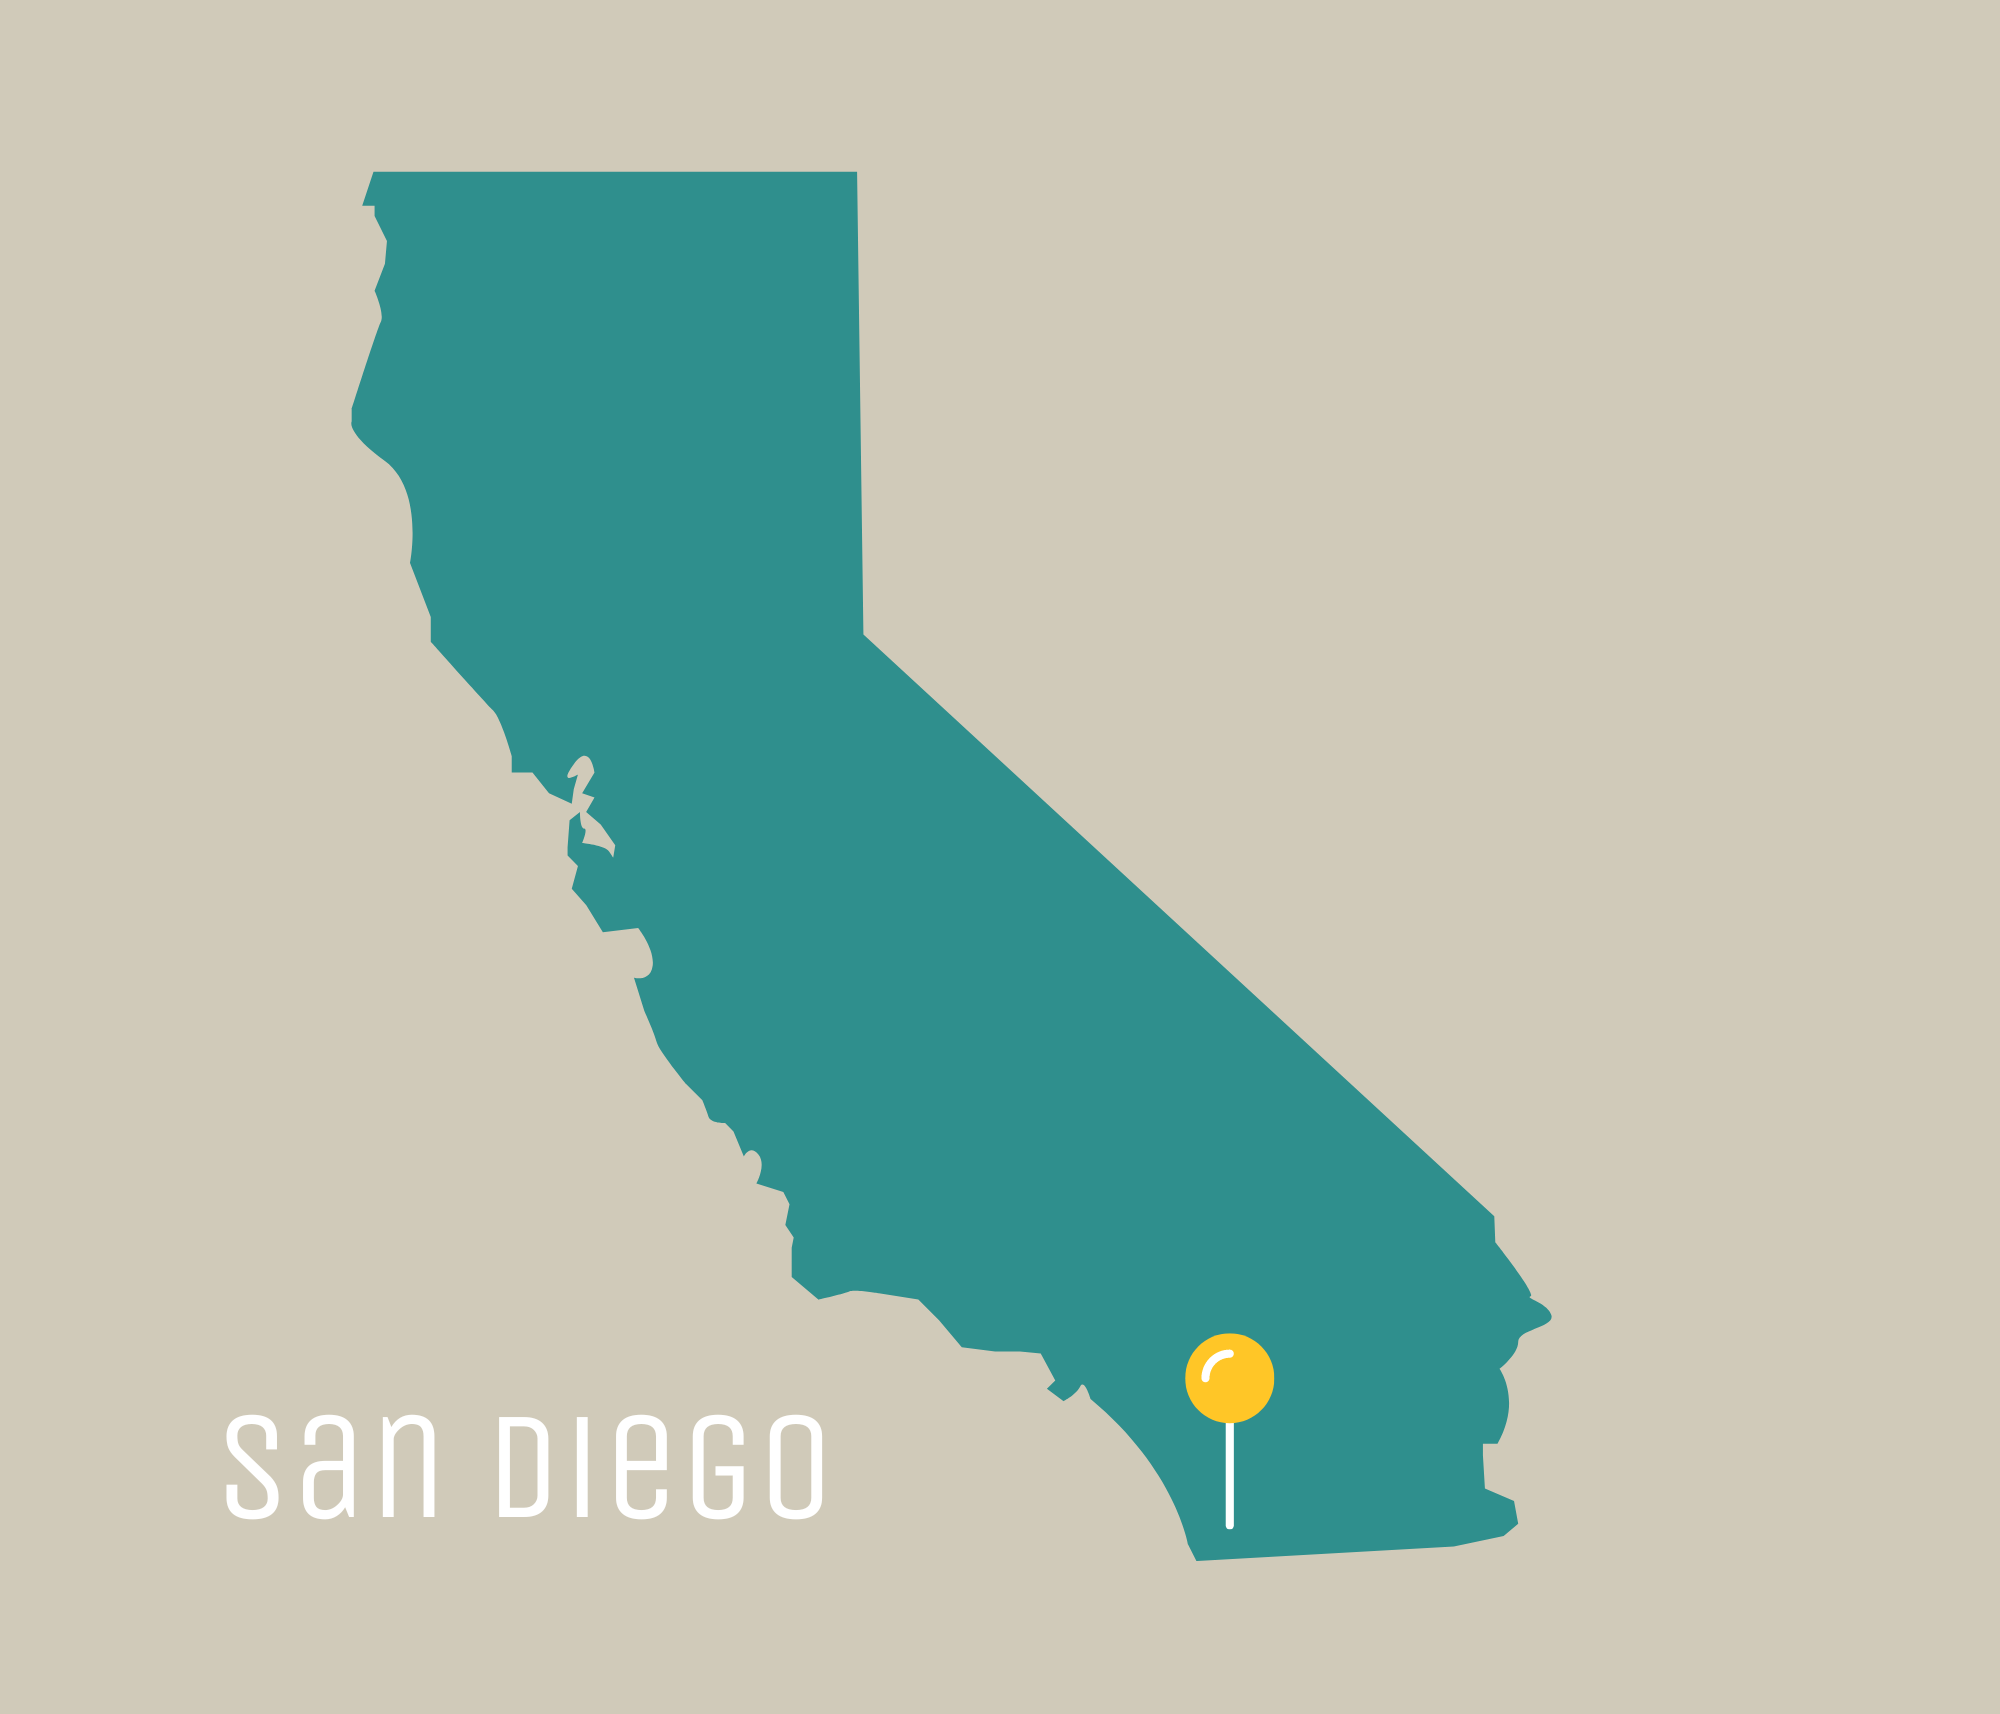 Yellow pin in the state of California where San Diego is